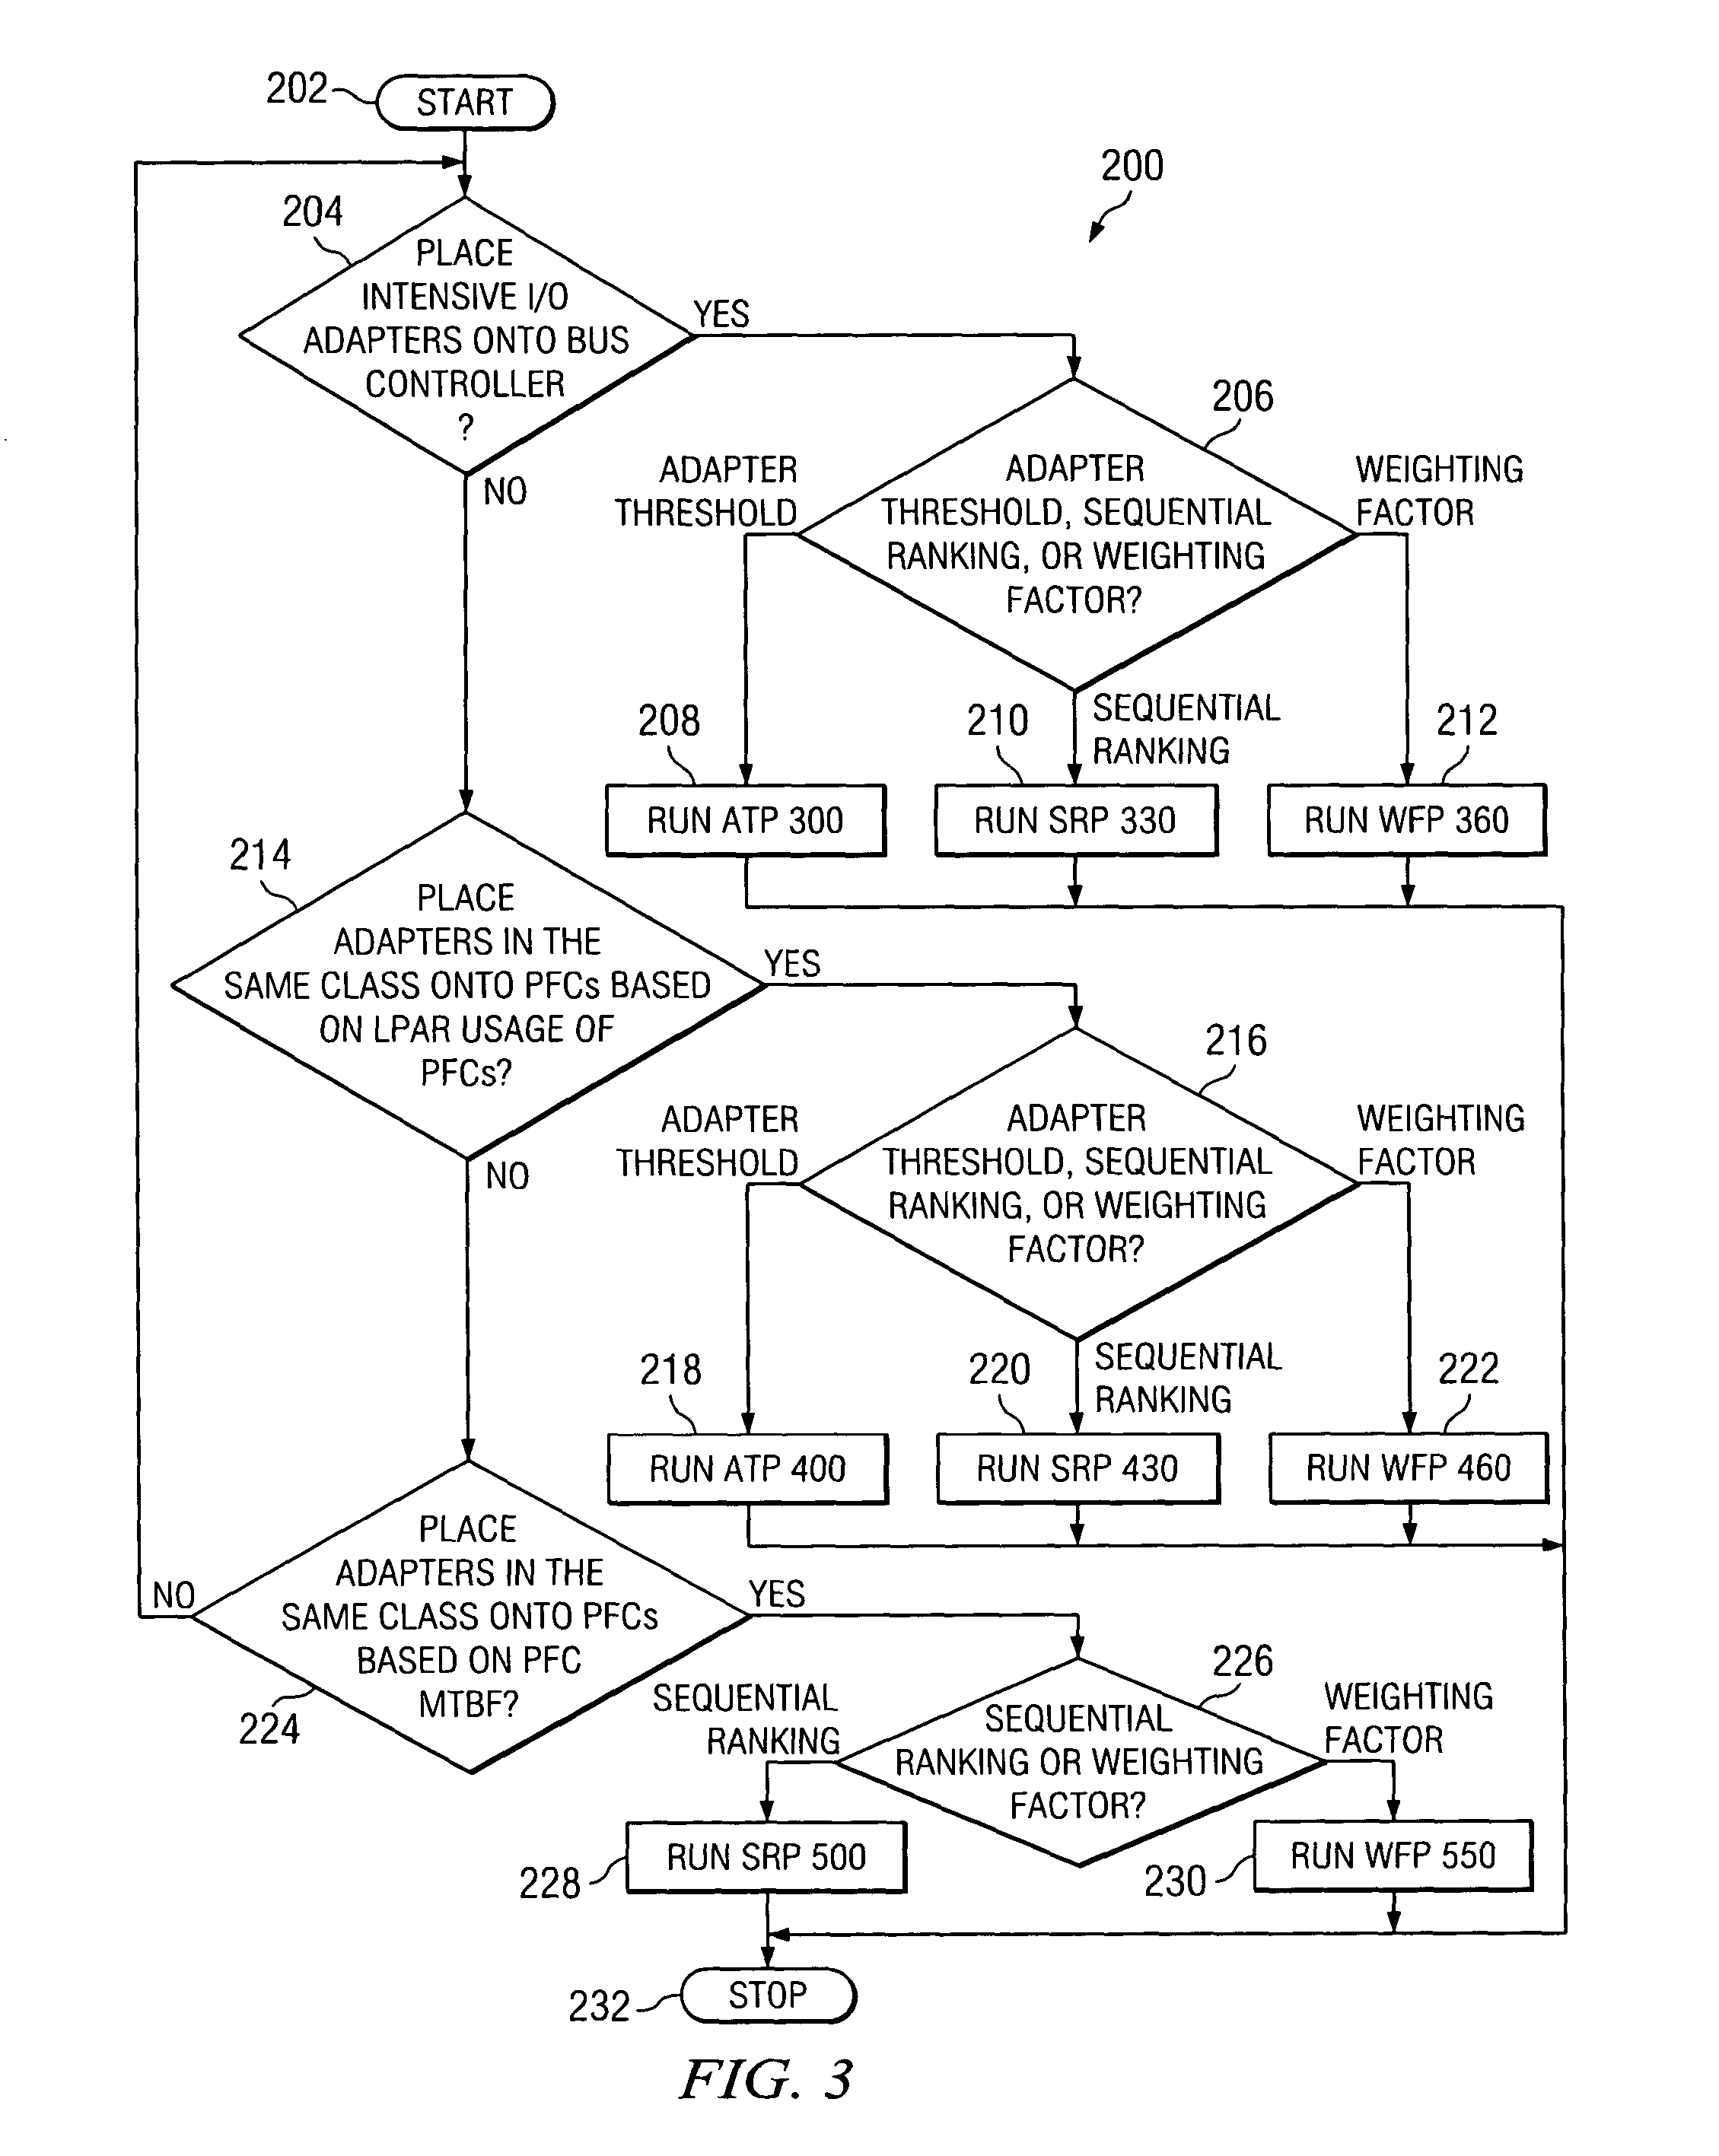 Services heuristics for computer adapter placement in logical partitioning operations